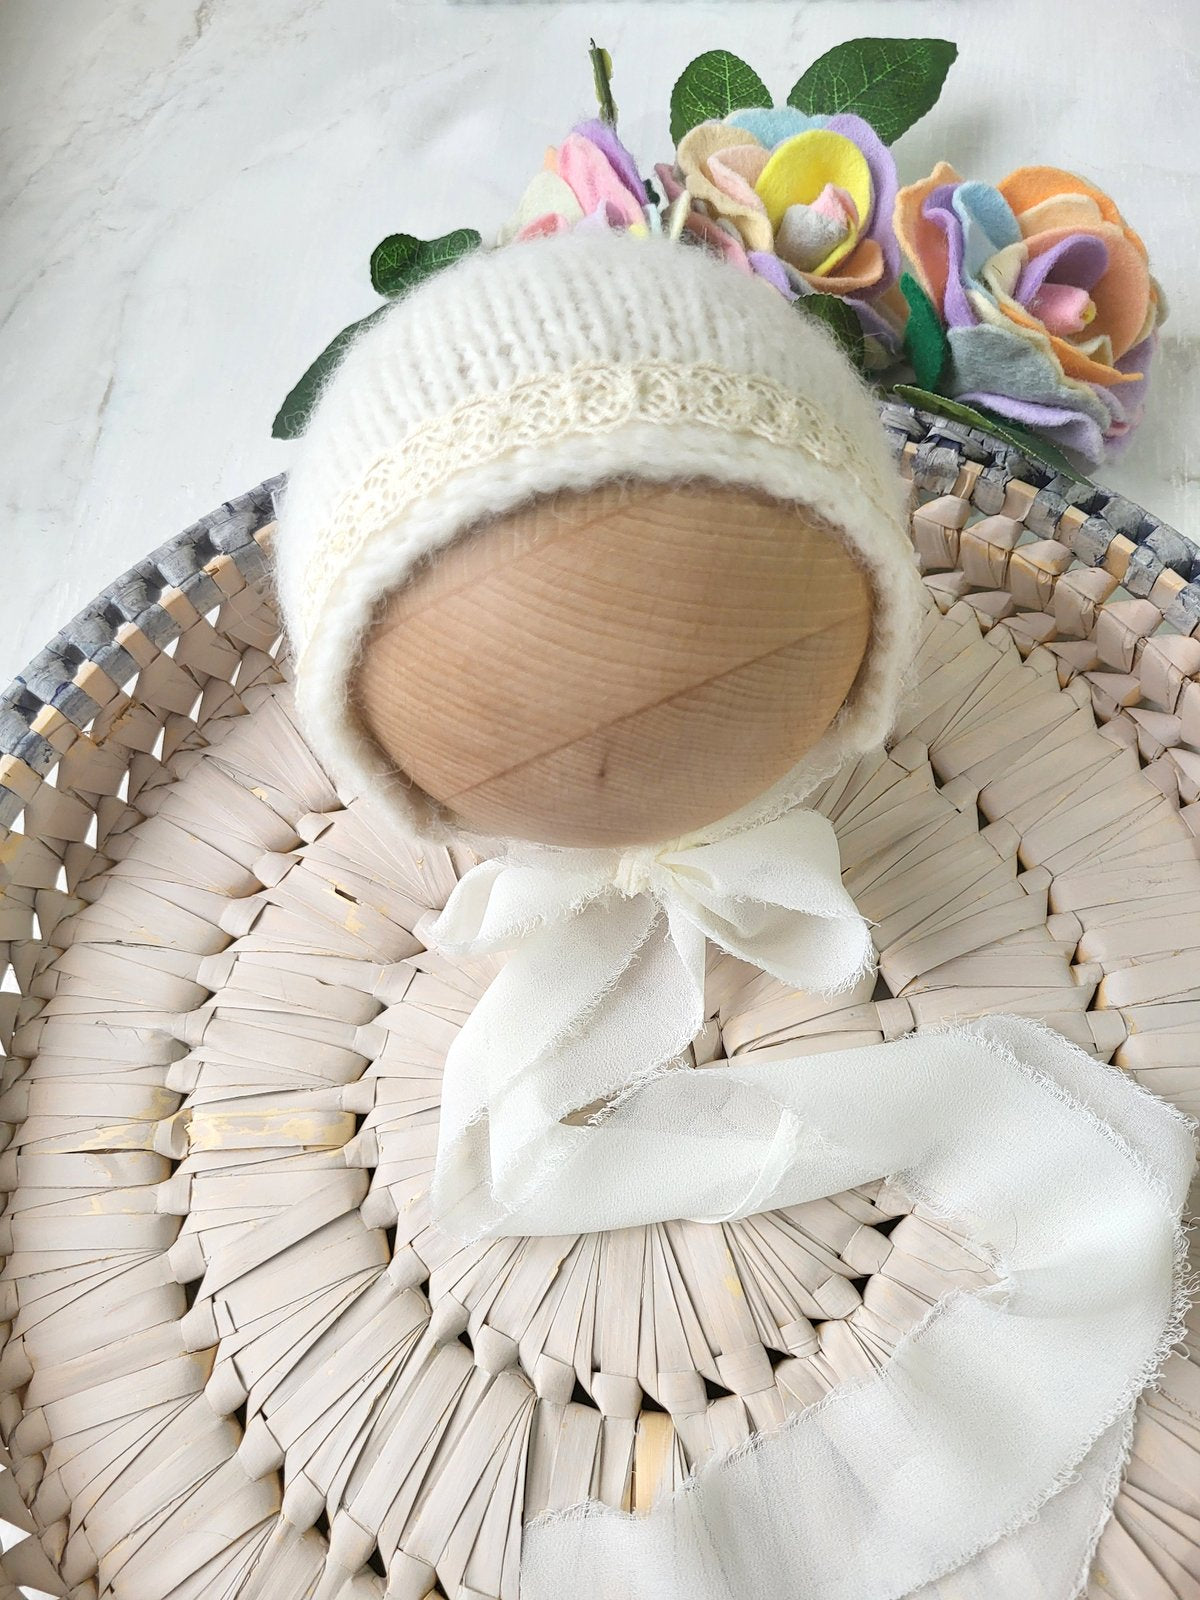 Handknit Cream Newborn bonnet with Ribbon ties and vintage lace trim (Ready to Send)